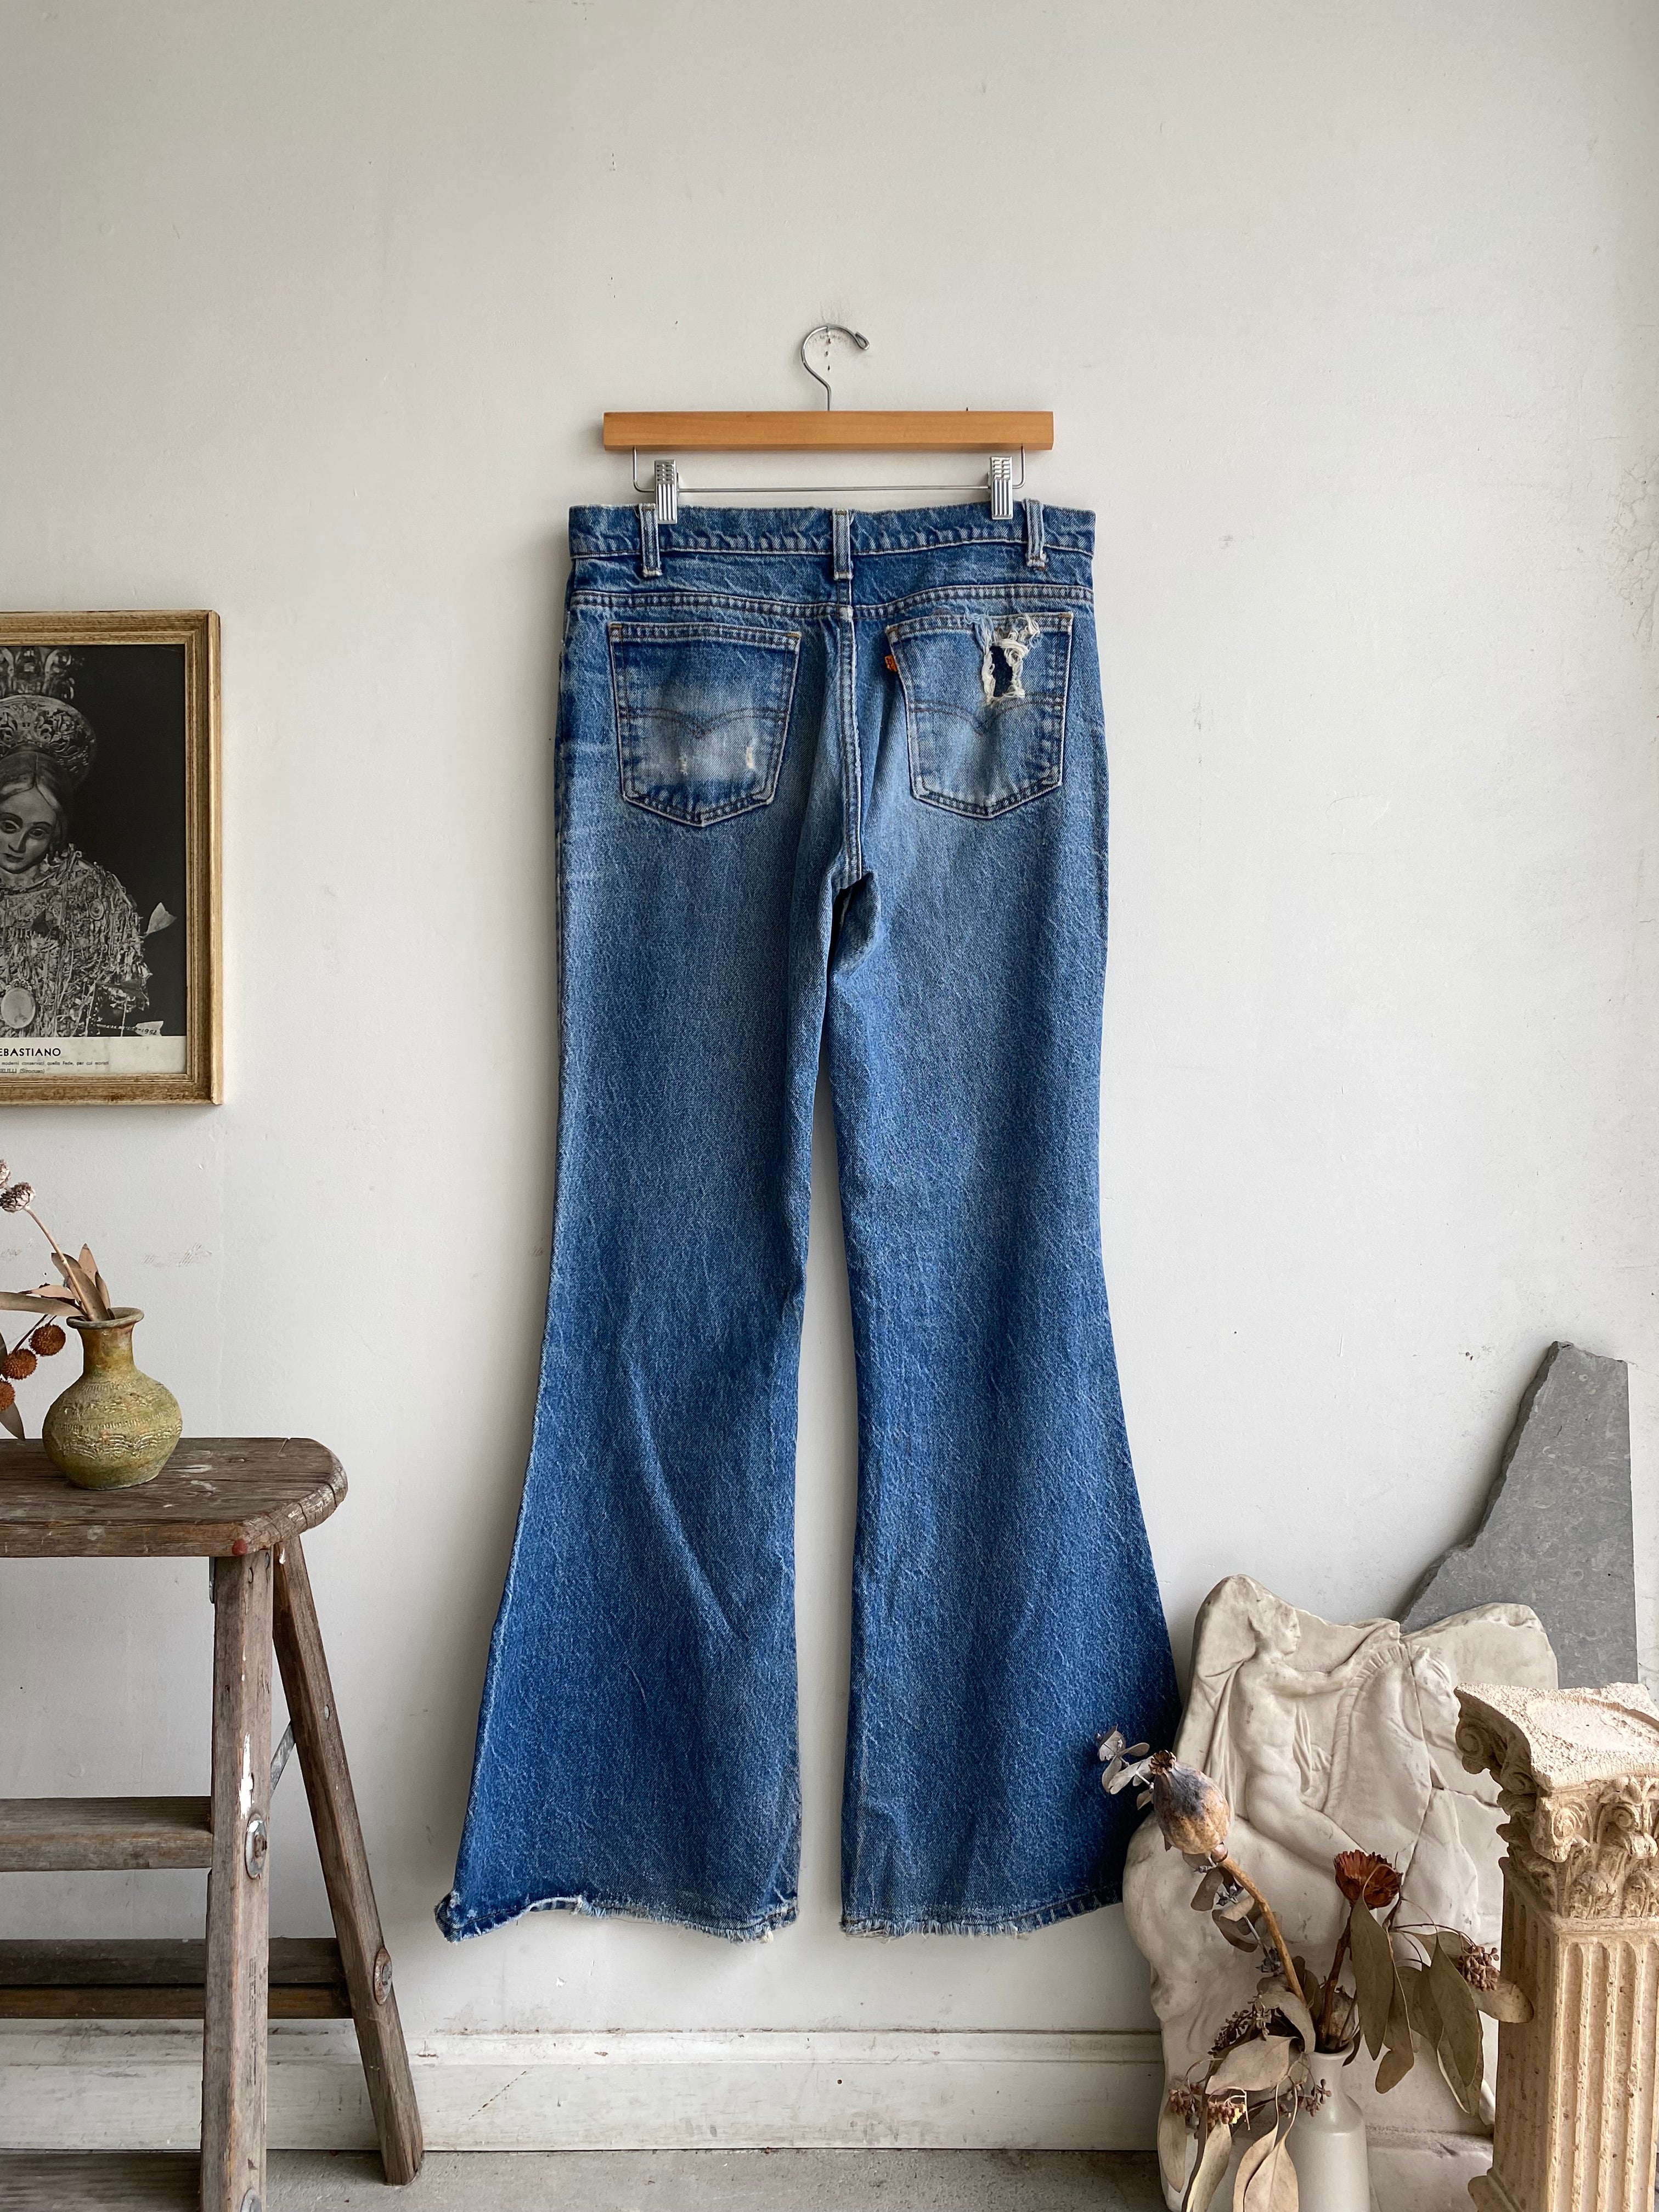 1980s Bell-Bottom Levi's Jeans (32 x 32)